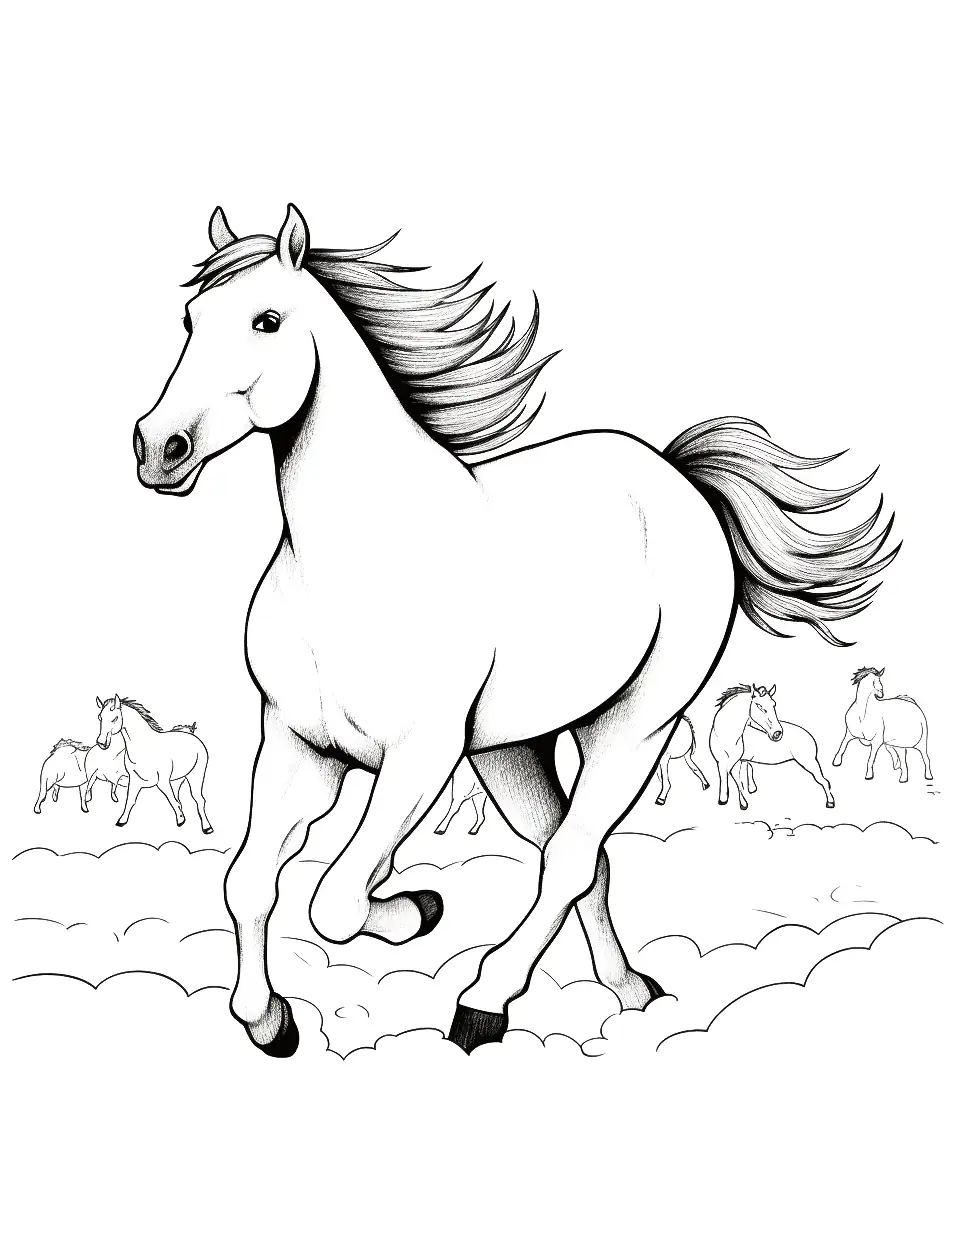 Running Mustang in the Wild Horse Coloring Page - A wild Mustang horse running with a herd in the wild.